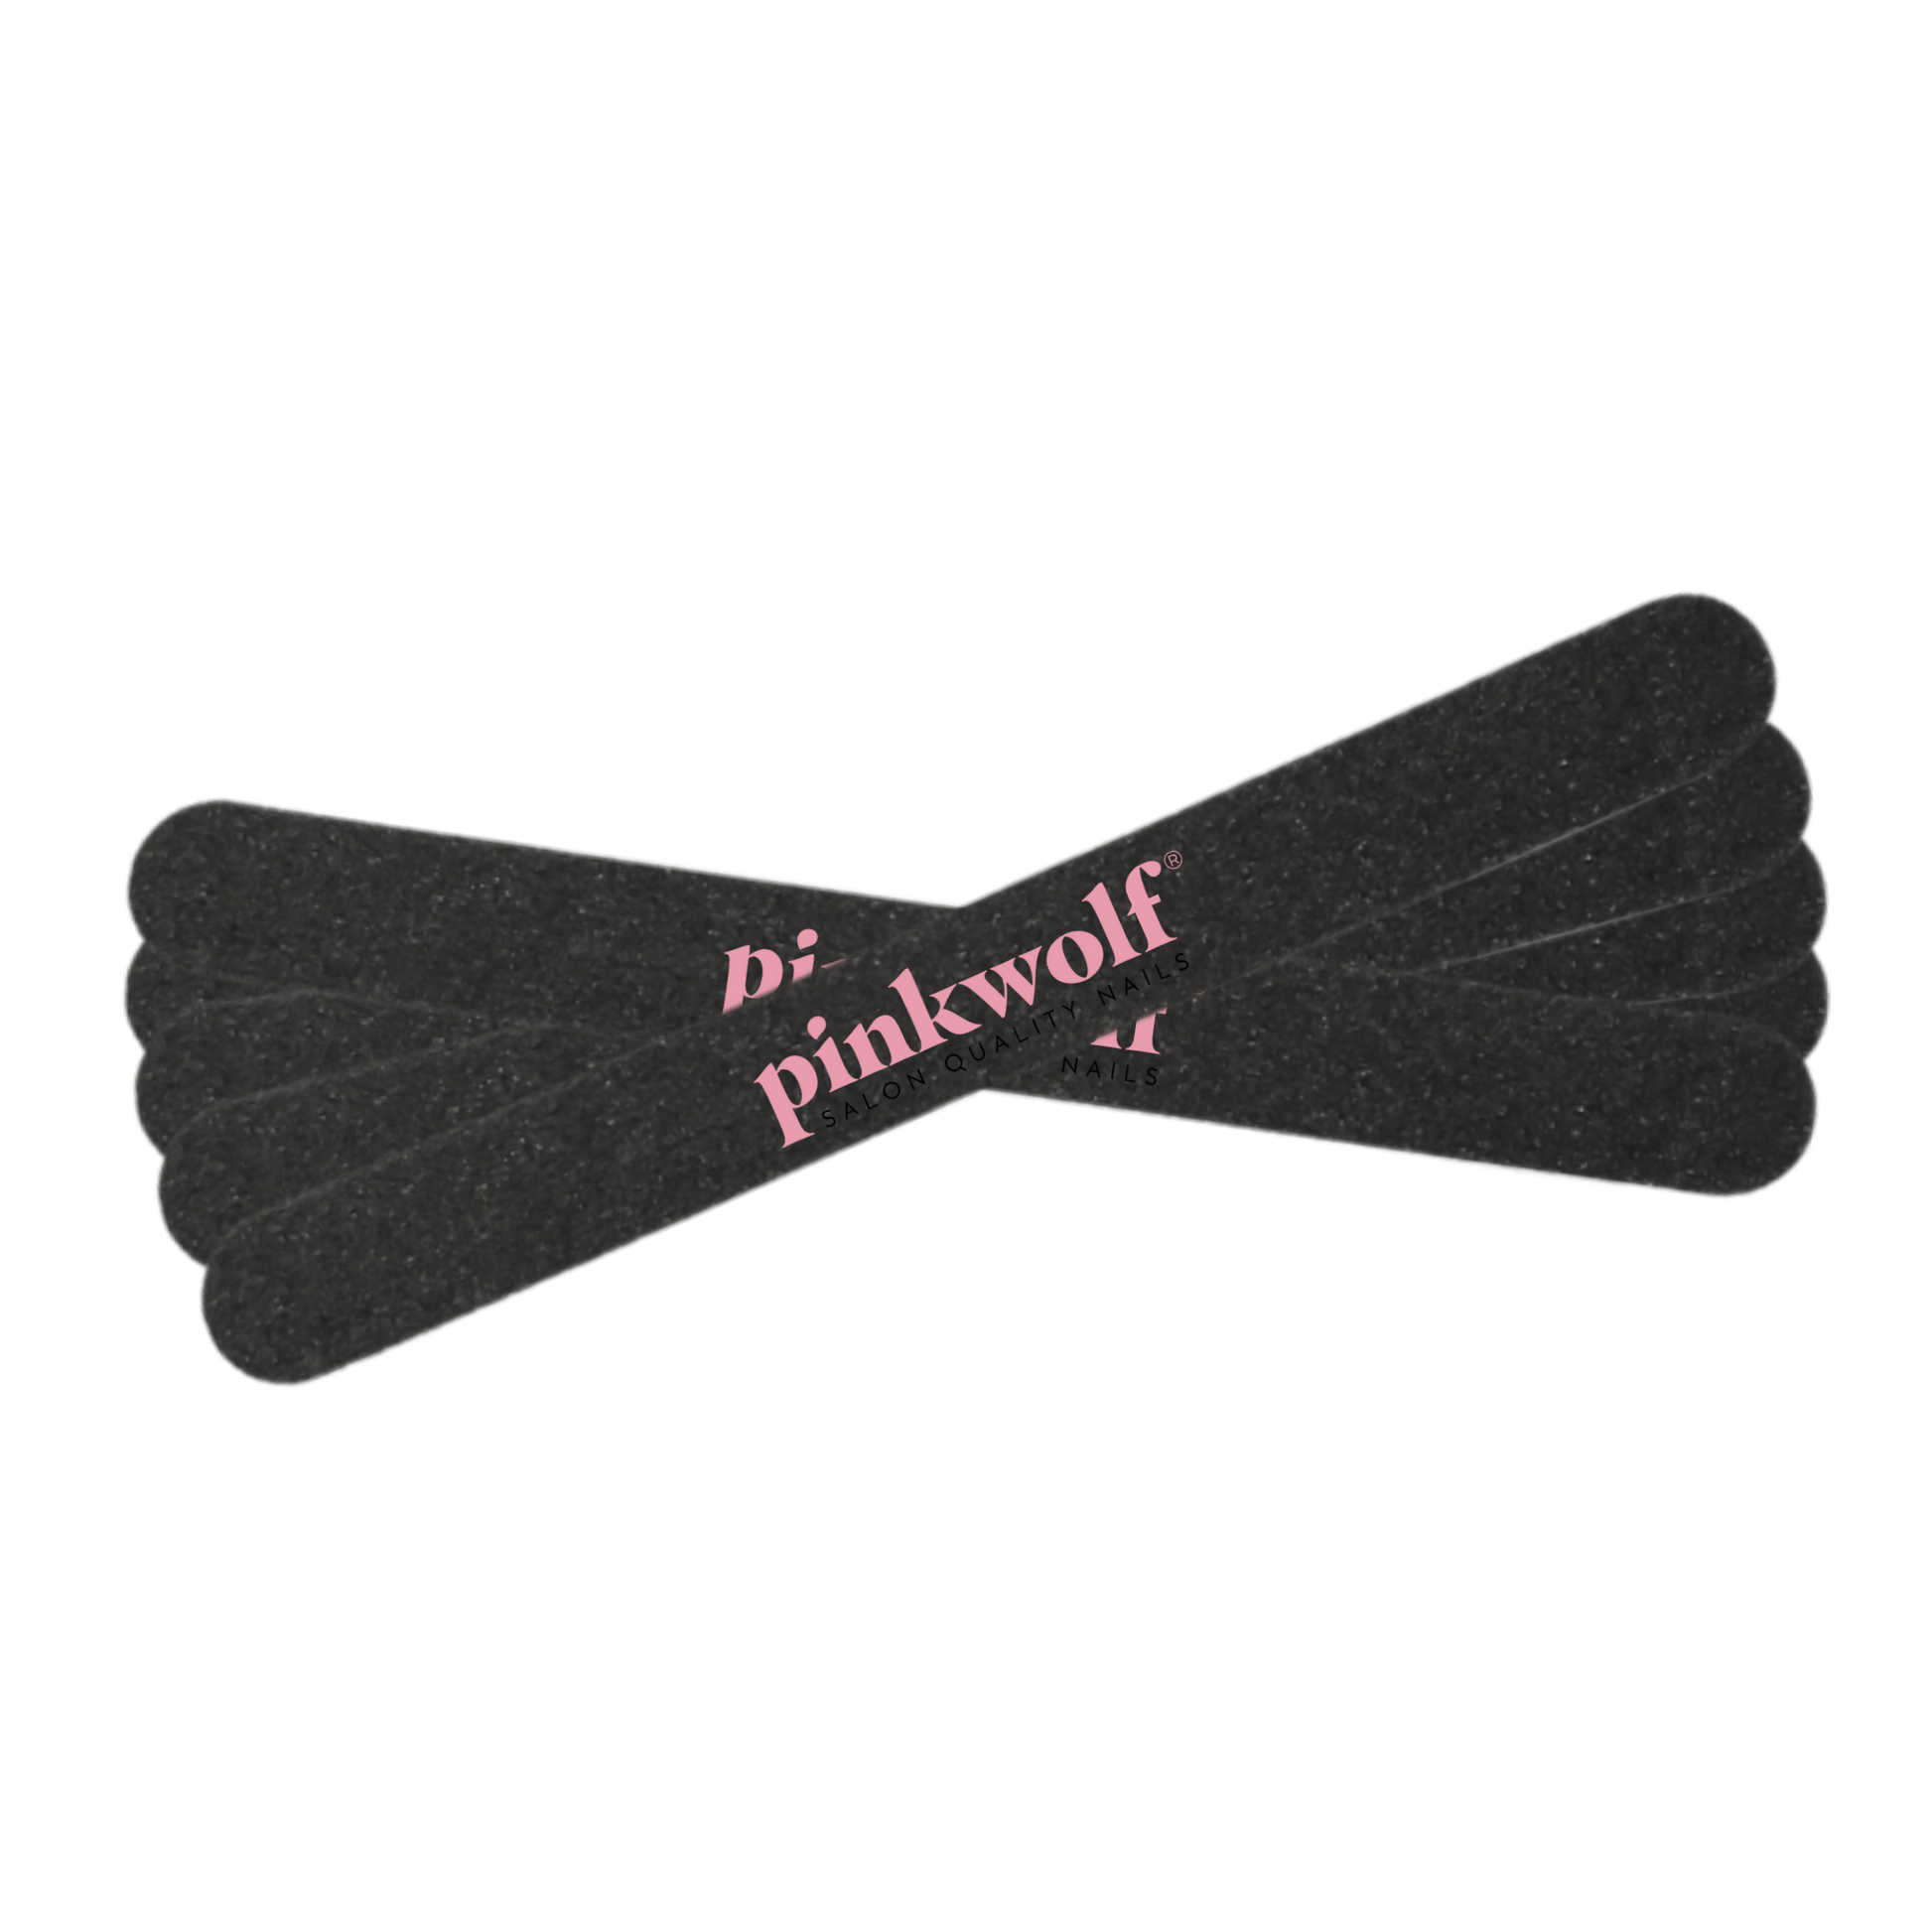 pinkwolf 5 pack of nail files